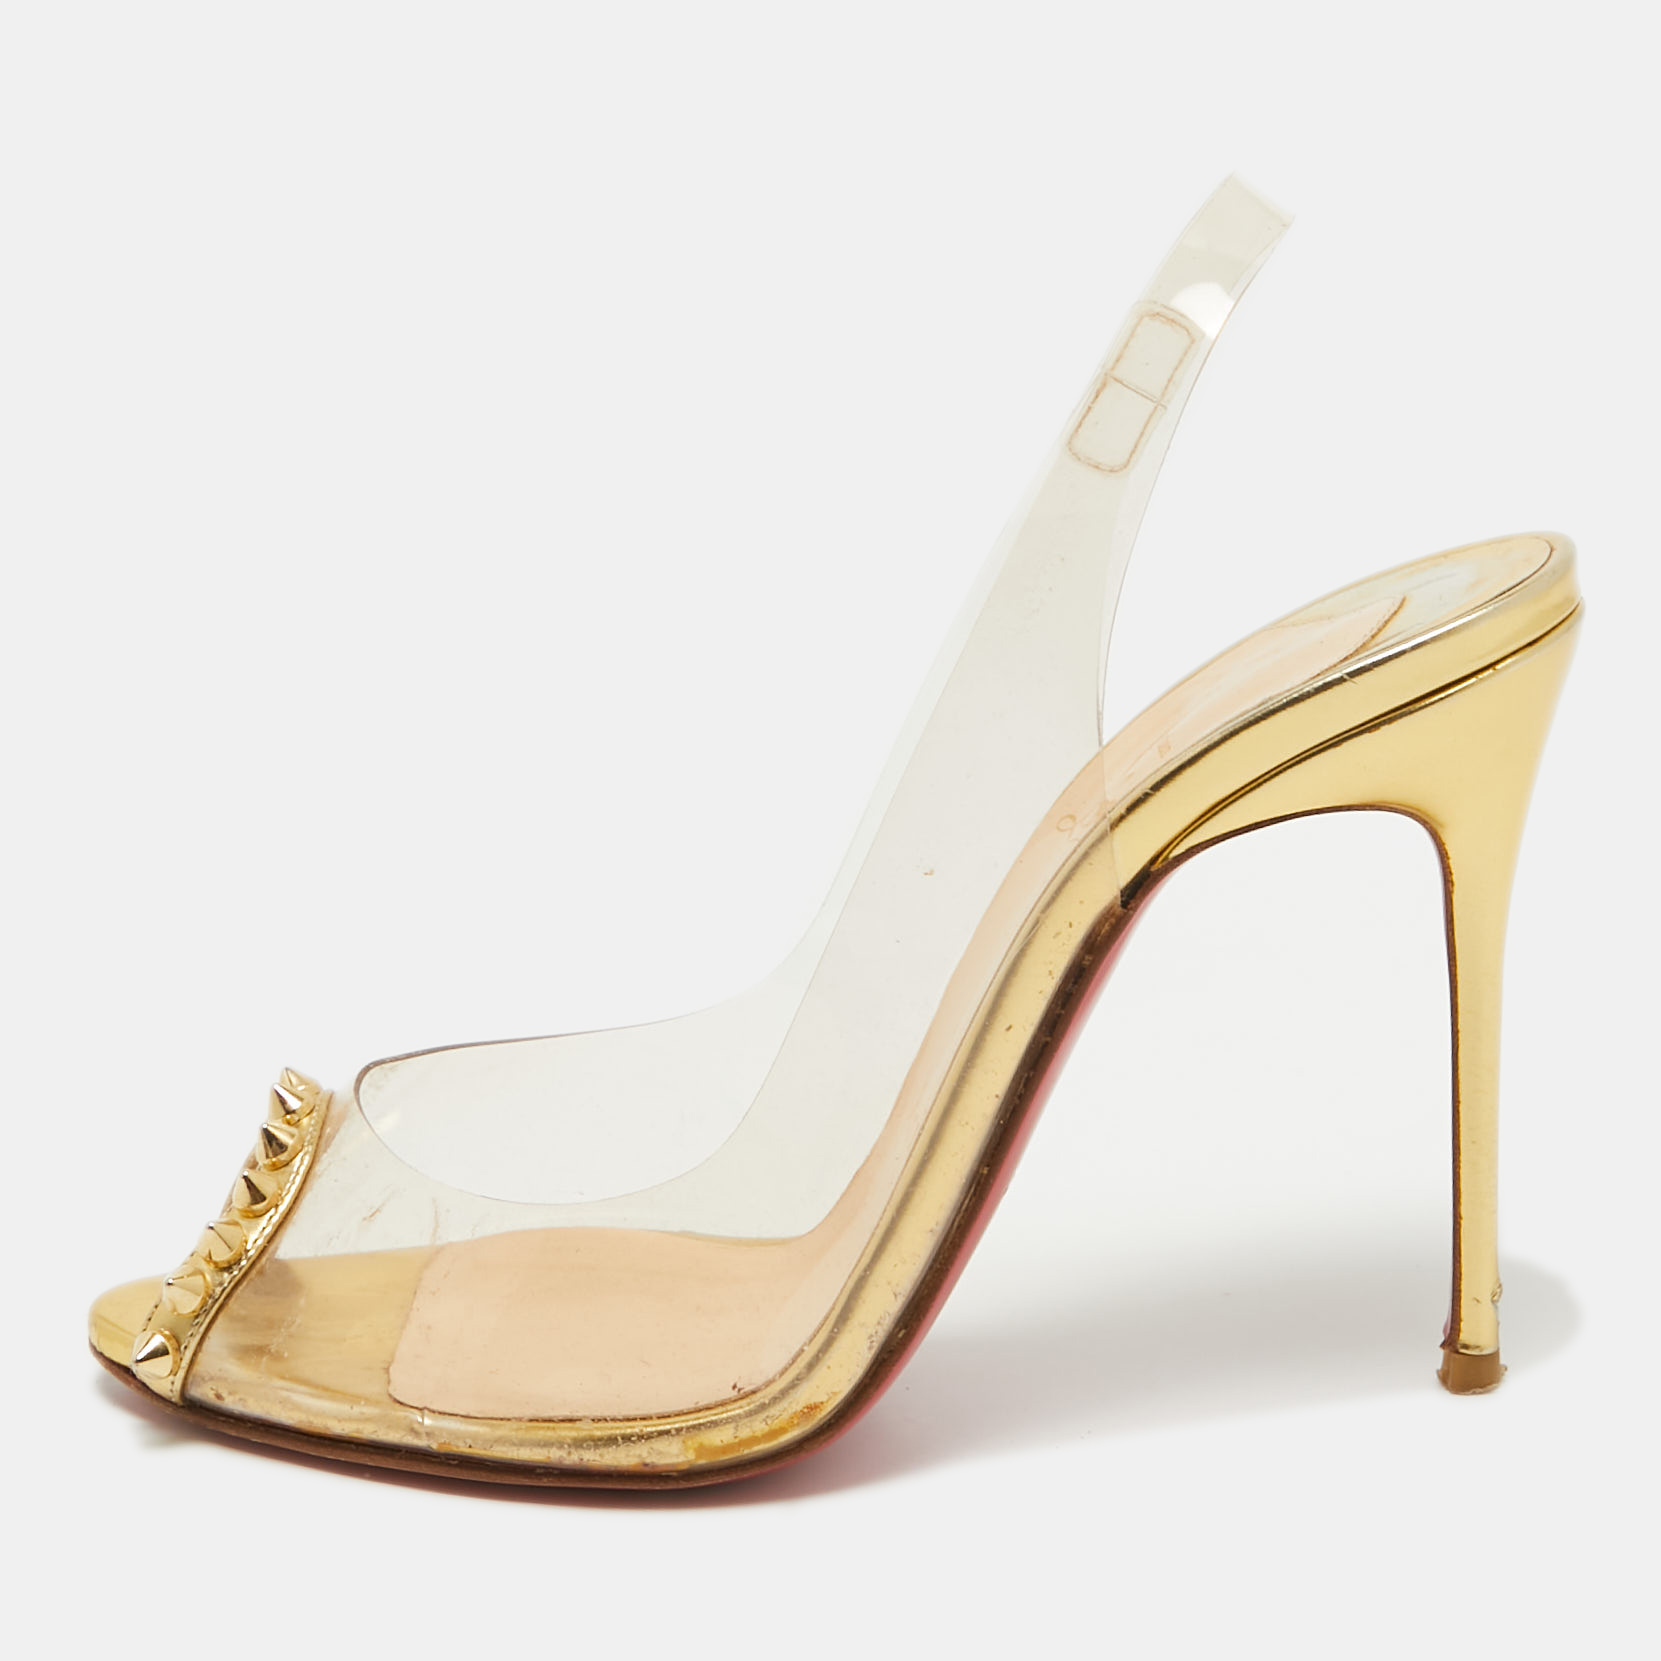 Christian louboutin gold leather and pvc ring my toe sandals size 37